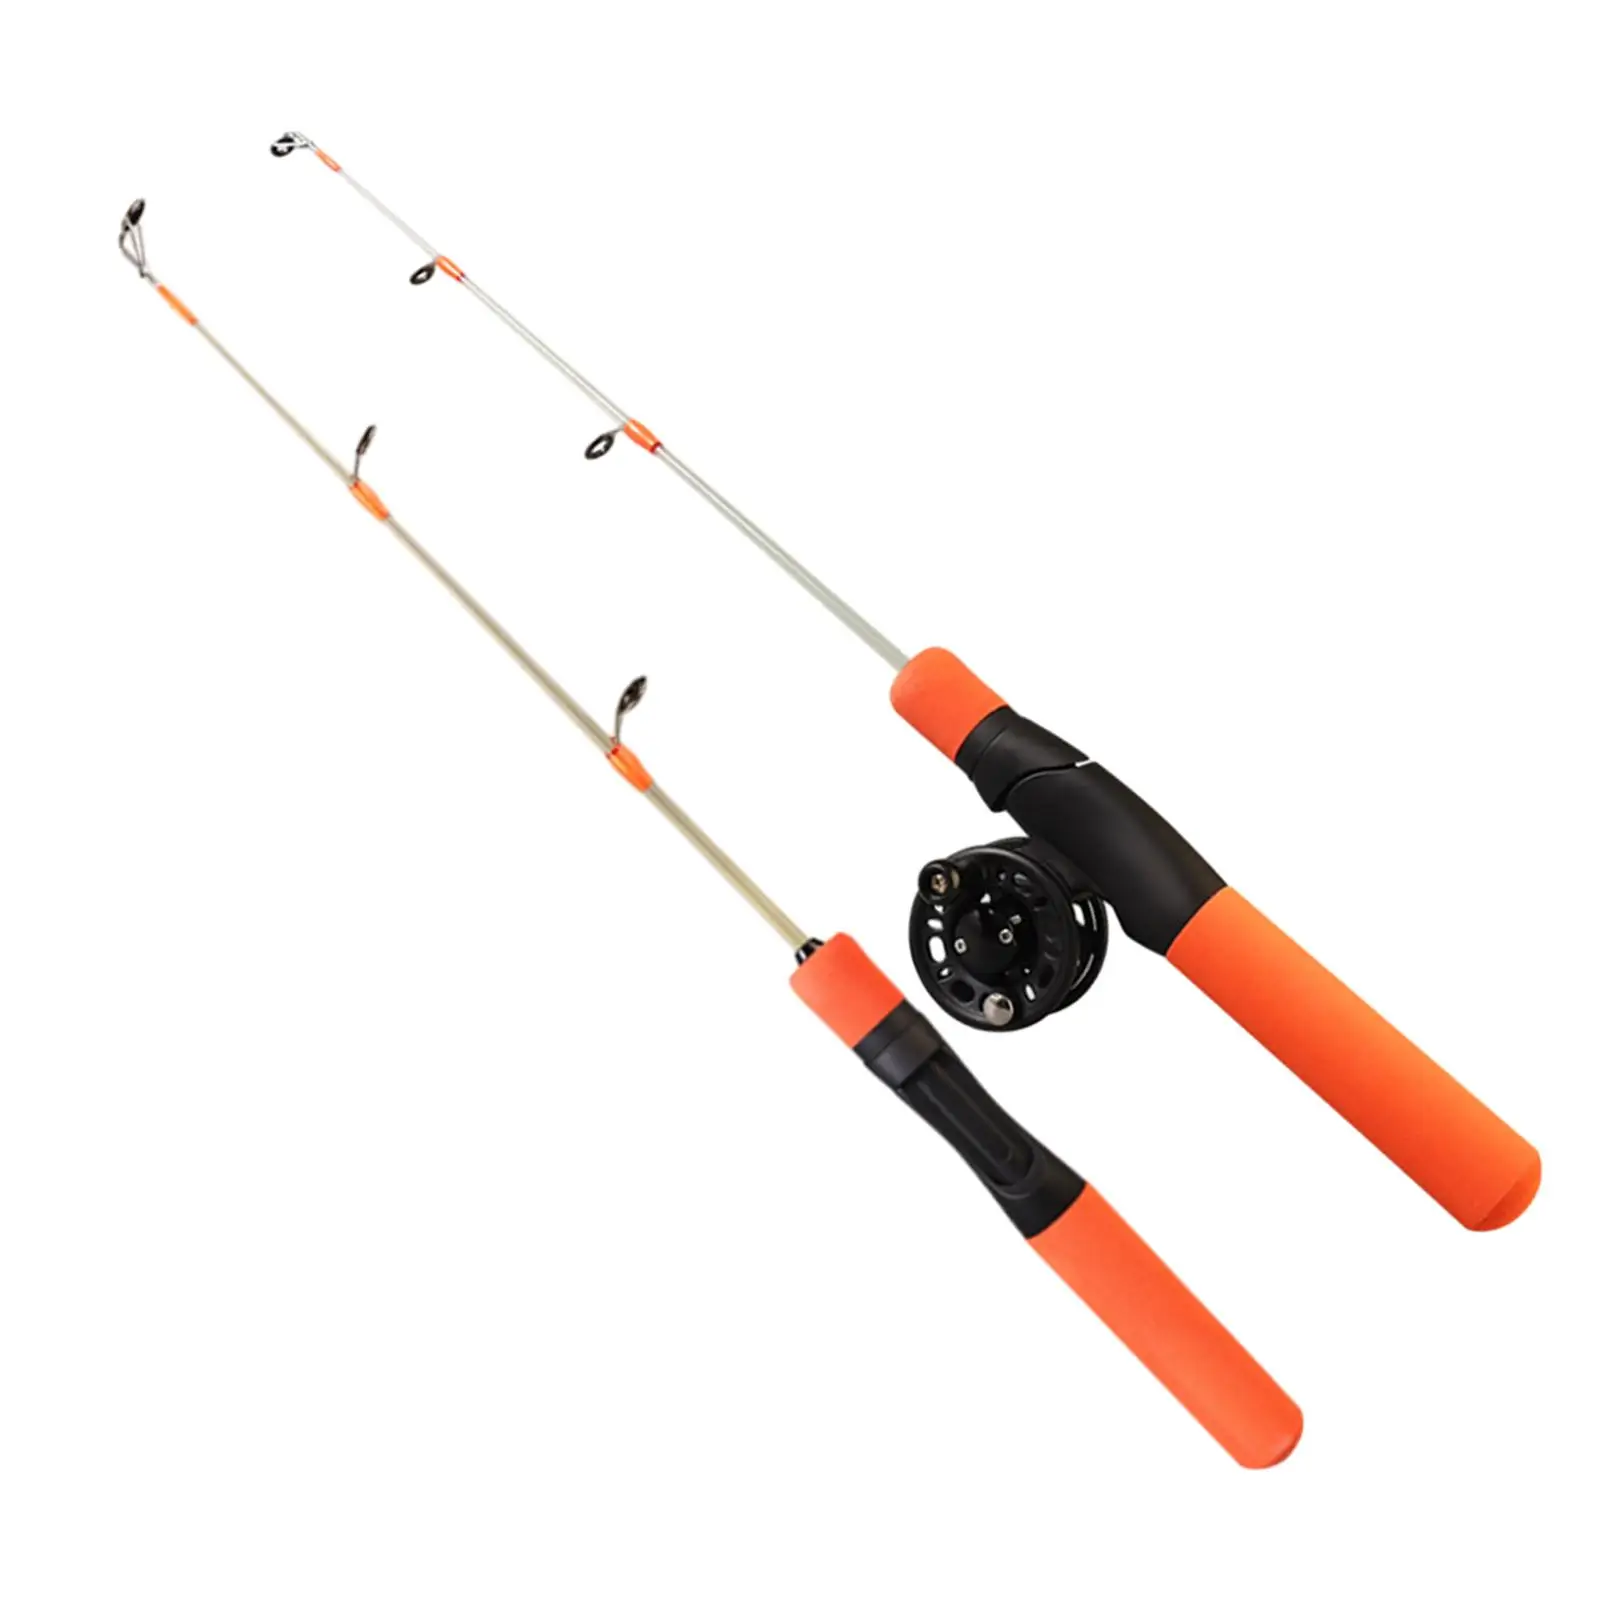 Ice Fishing Pole Lightweight Fishing Gear Glass Fiber Easy to Carry Fishing Tool Fishing Tackle for Reservoir Lake Fishing